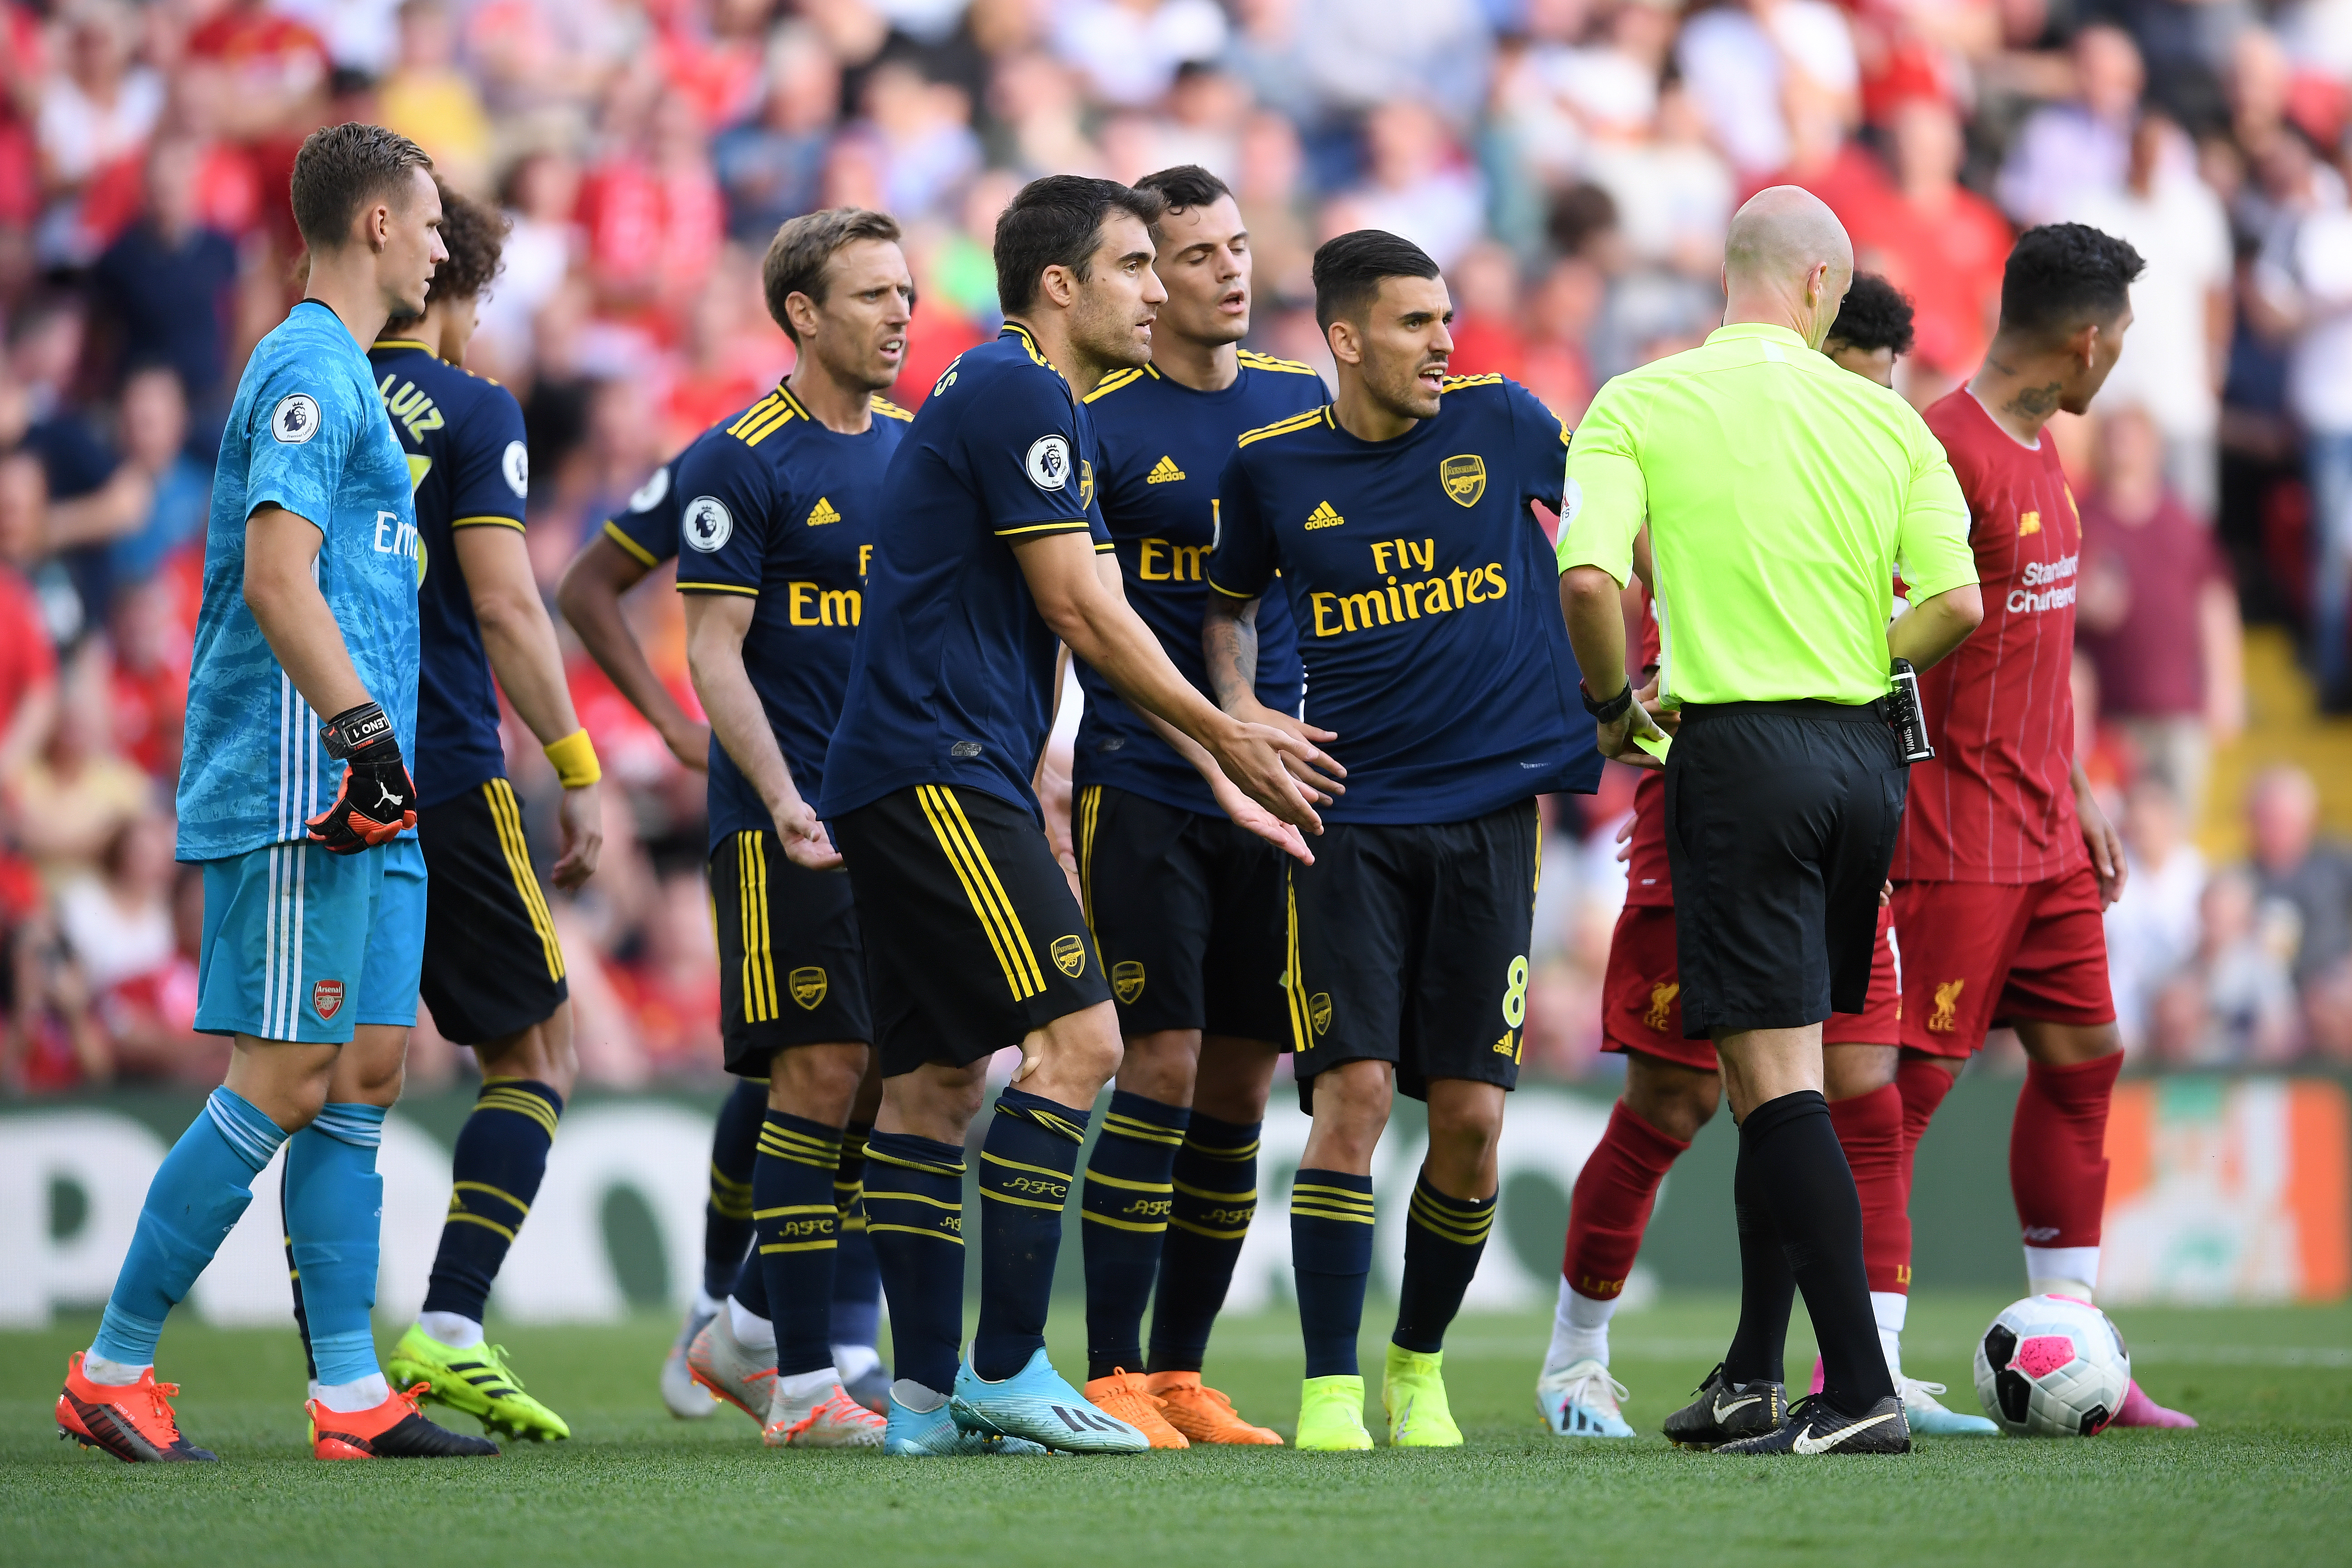 LIVERPOOL, ENGLAND - AUGUST 24: Arsenal players argue with the referee over David Luiz' yellow card during the Premier League match between Liverpool FC and Arsenal FC at Anfield on August 24, 2019 in Liverpool, United Kingdom. (Photo by Laurence Griffiths/Getty Images)